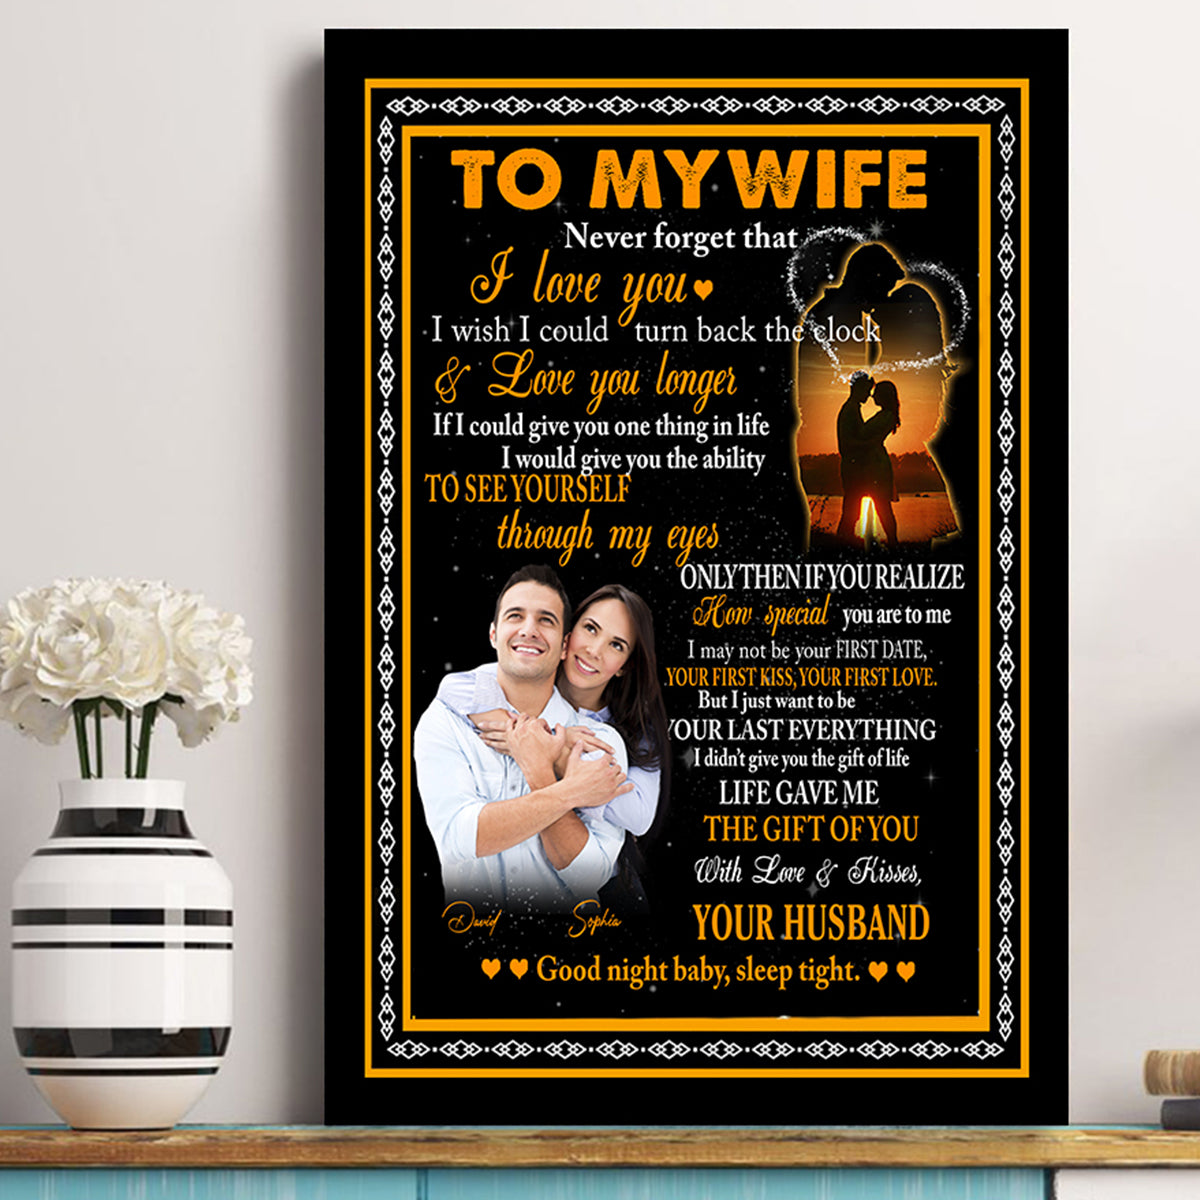 To My Wife Never Forget That I Love You - Personalized Canvas - Gift For Wife